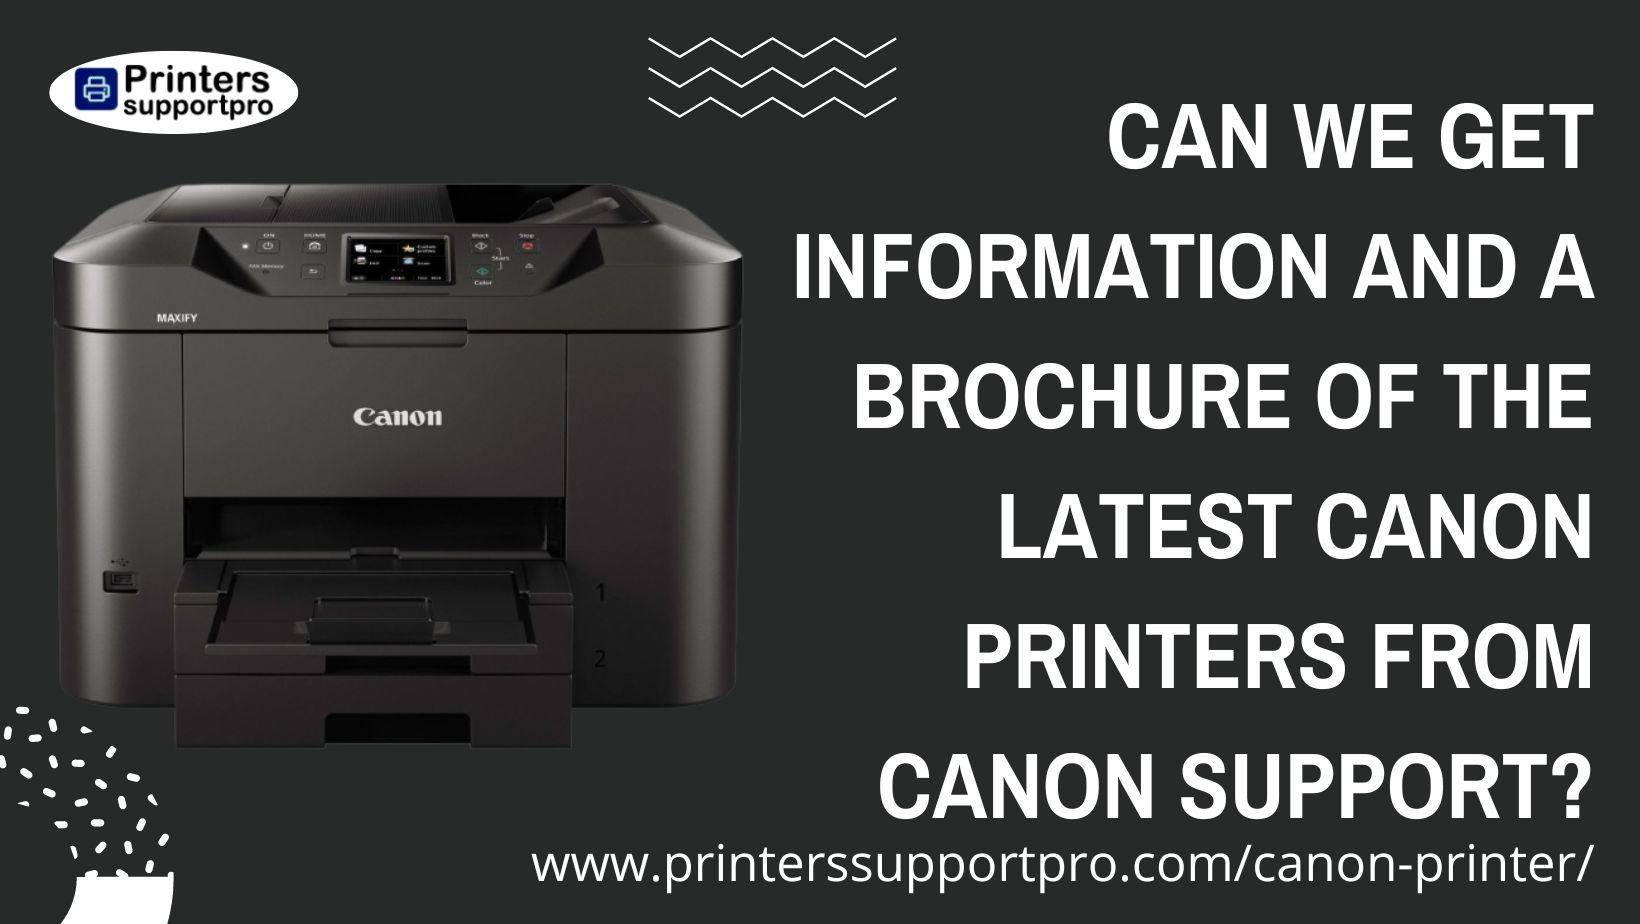 Can we get information and a brochure of the latest Canon printers from Canon support.jpg